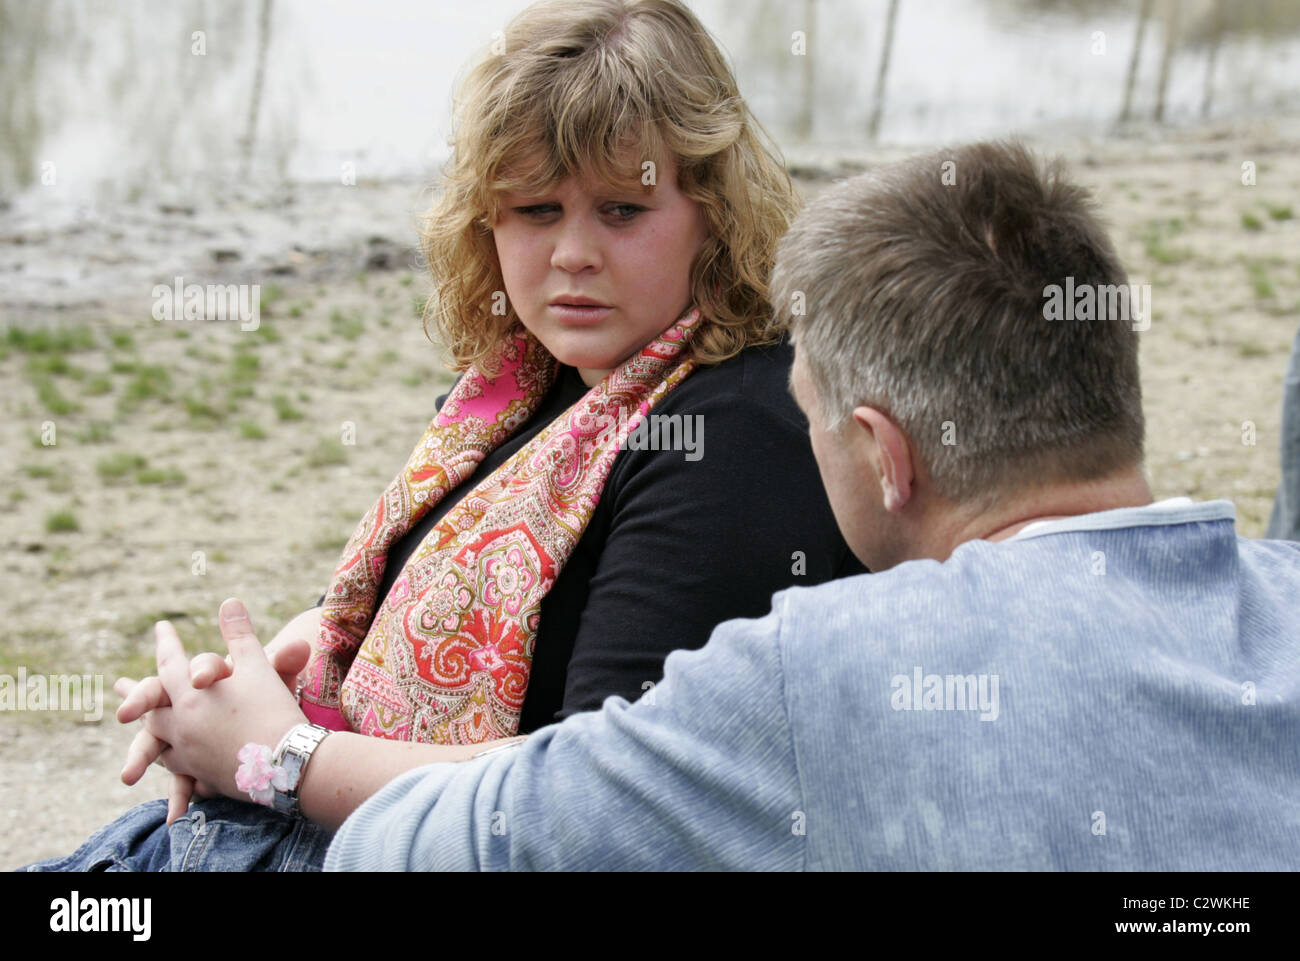 Obese teenage girl having an unpleasant conversation with her dad outside. Stock Photo